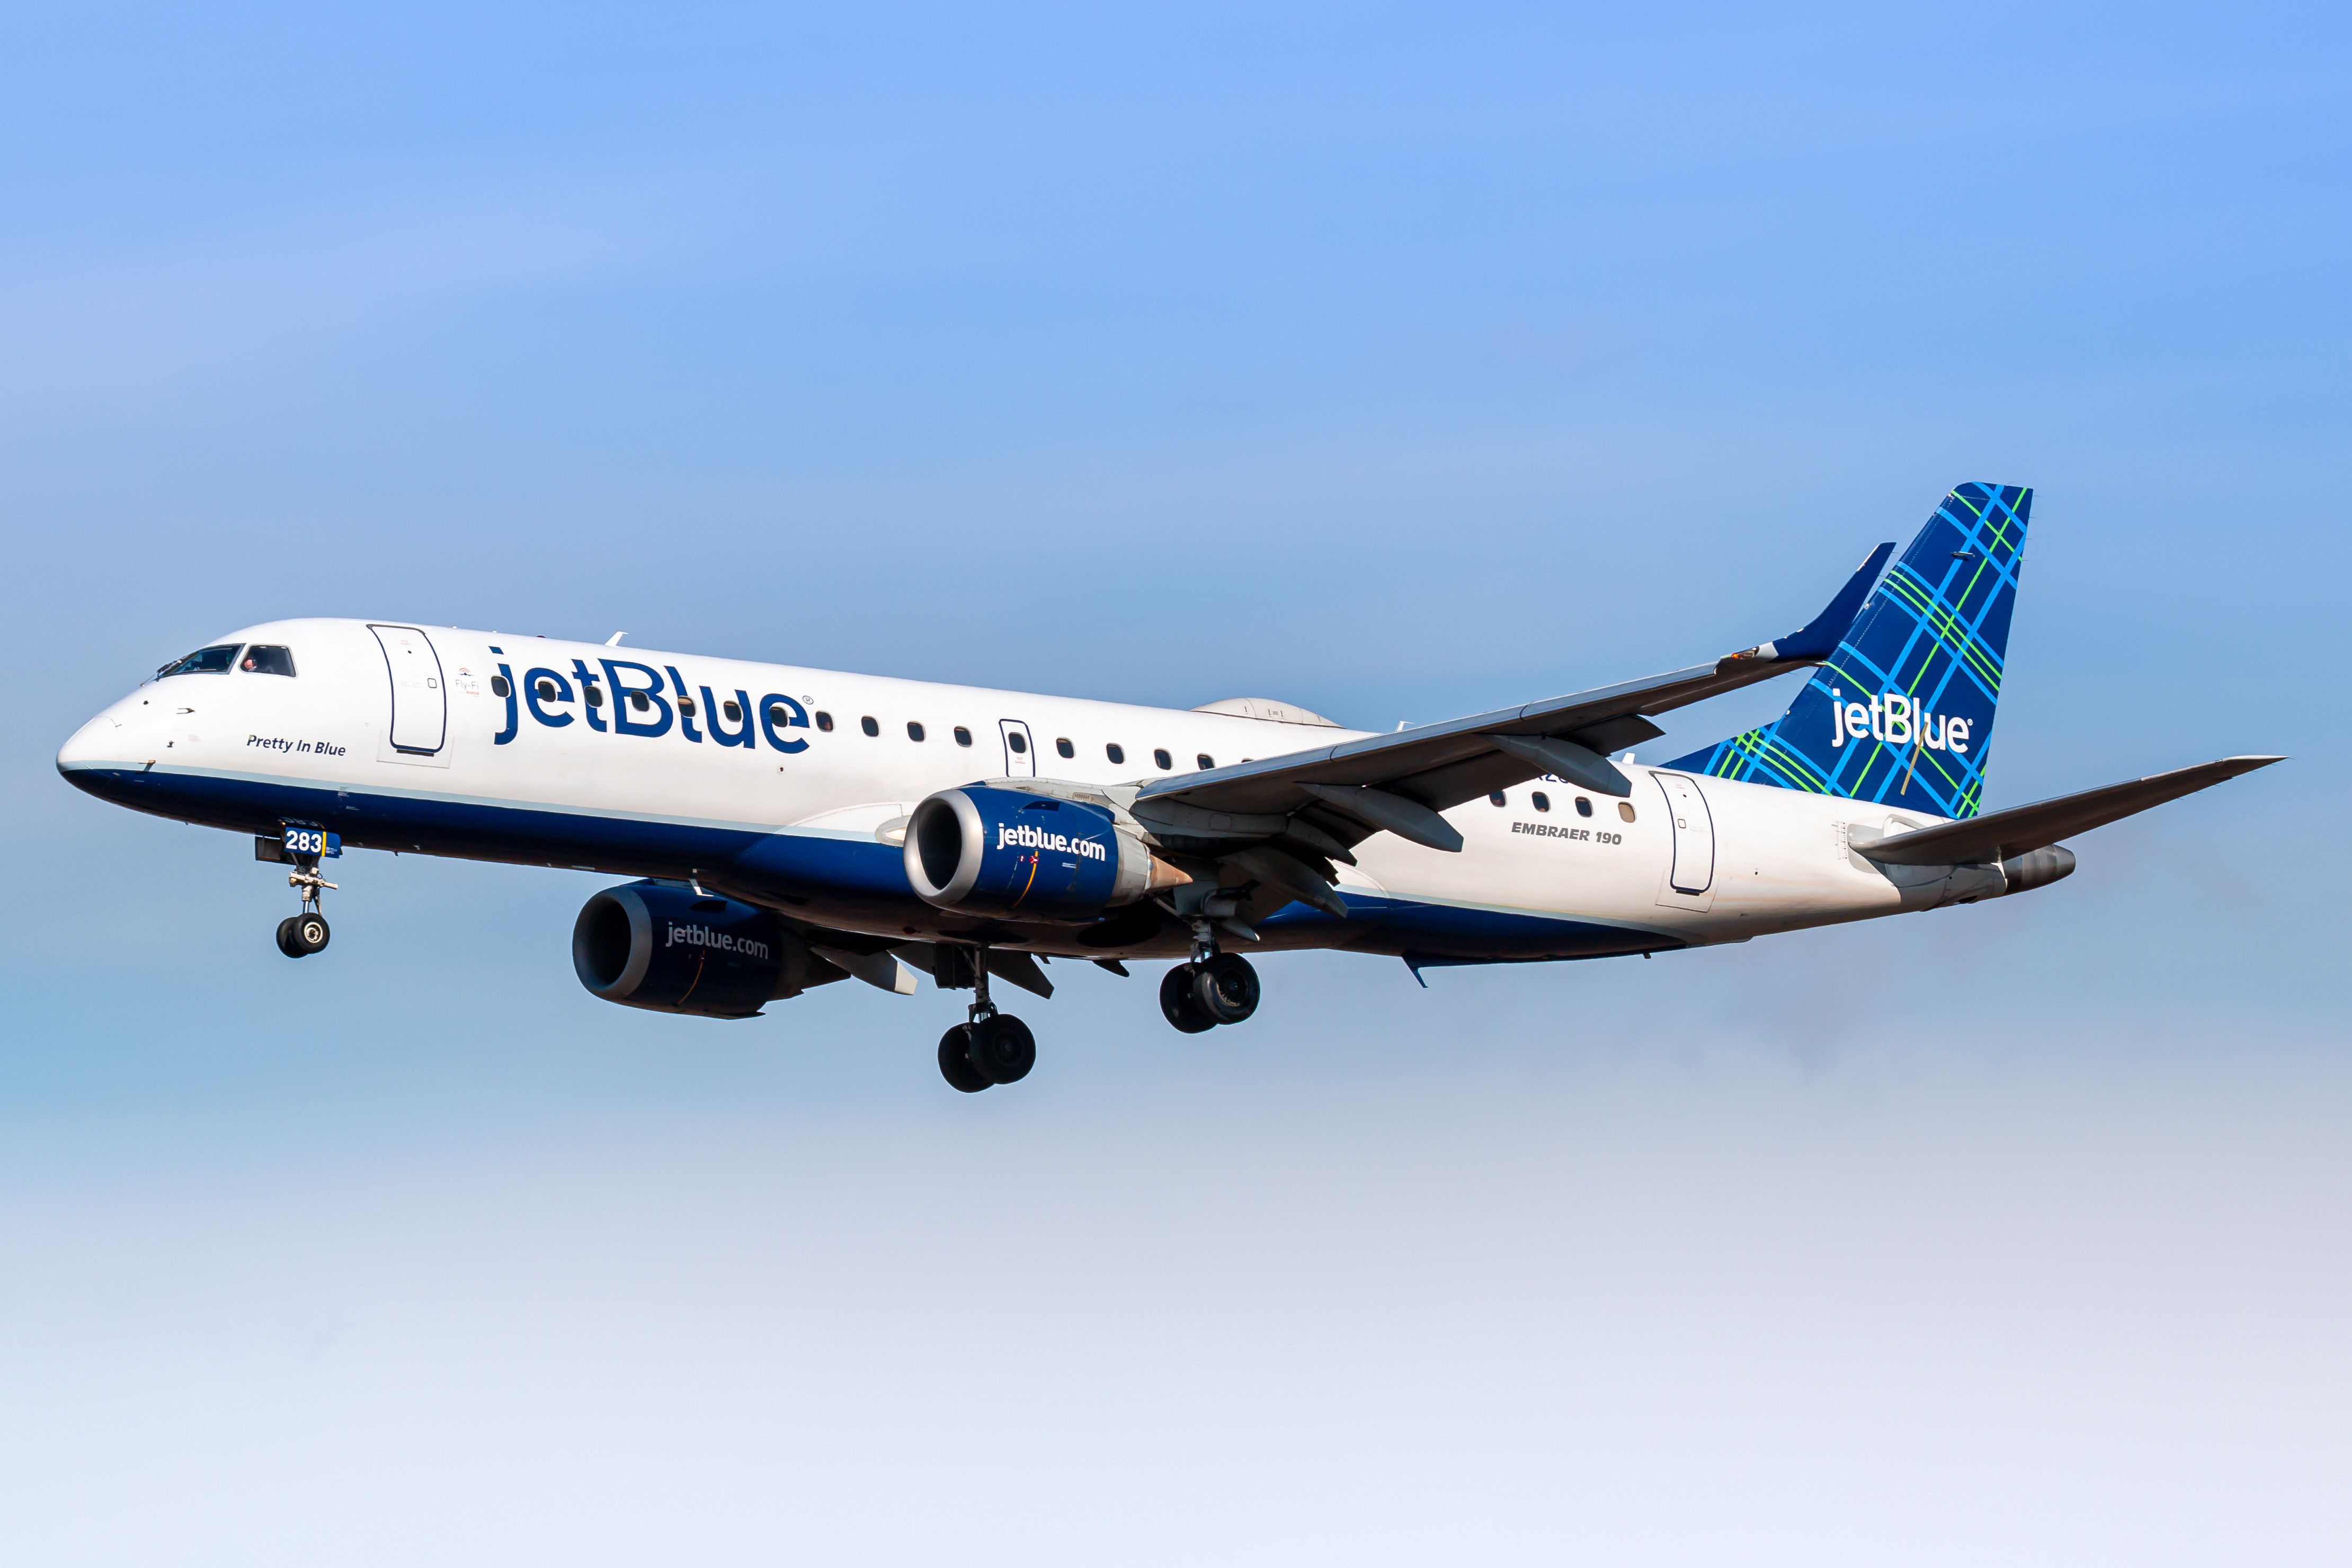 A Jetblue Embraer 190 flying in the sky.